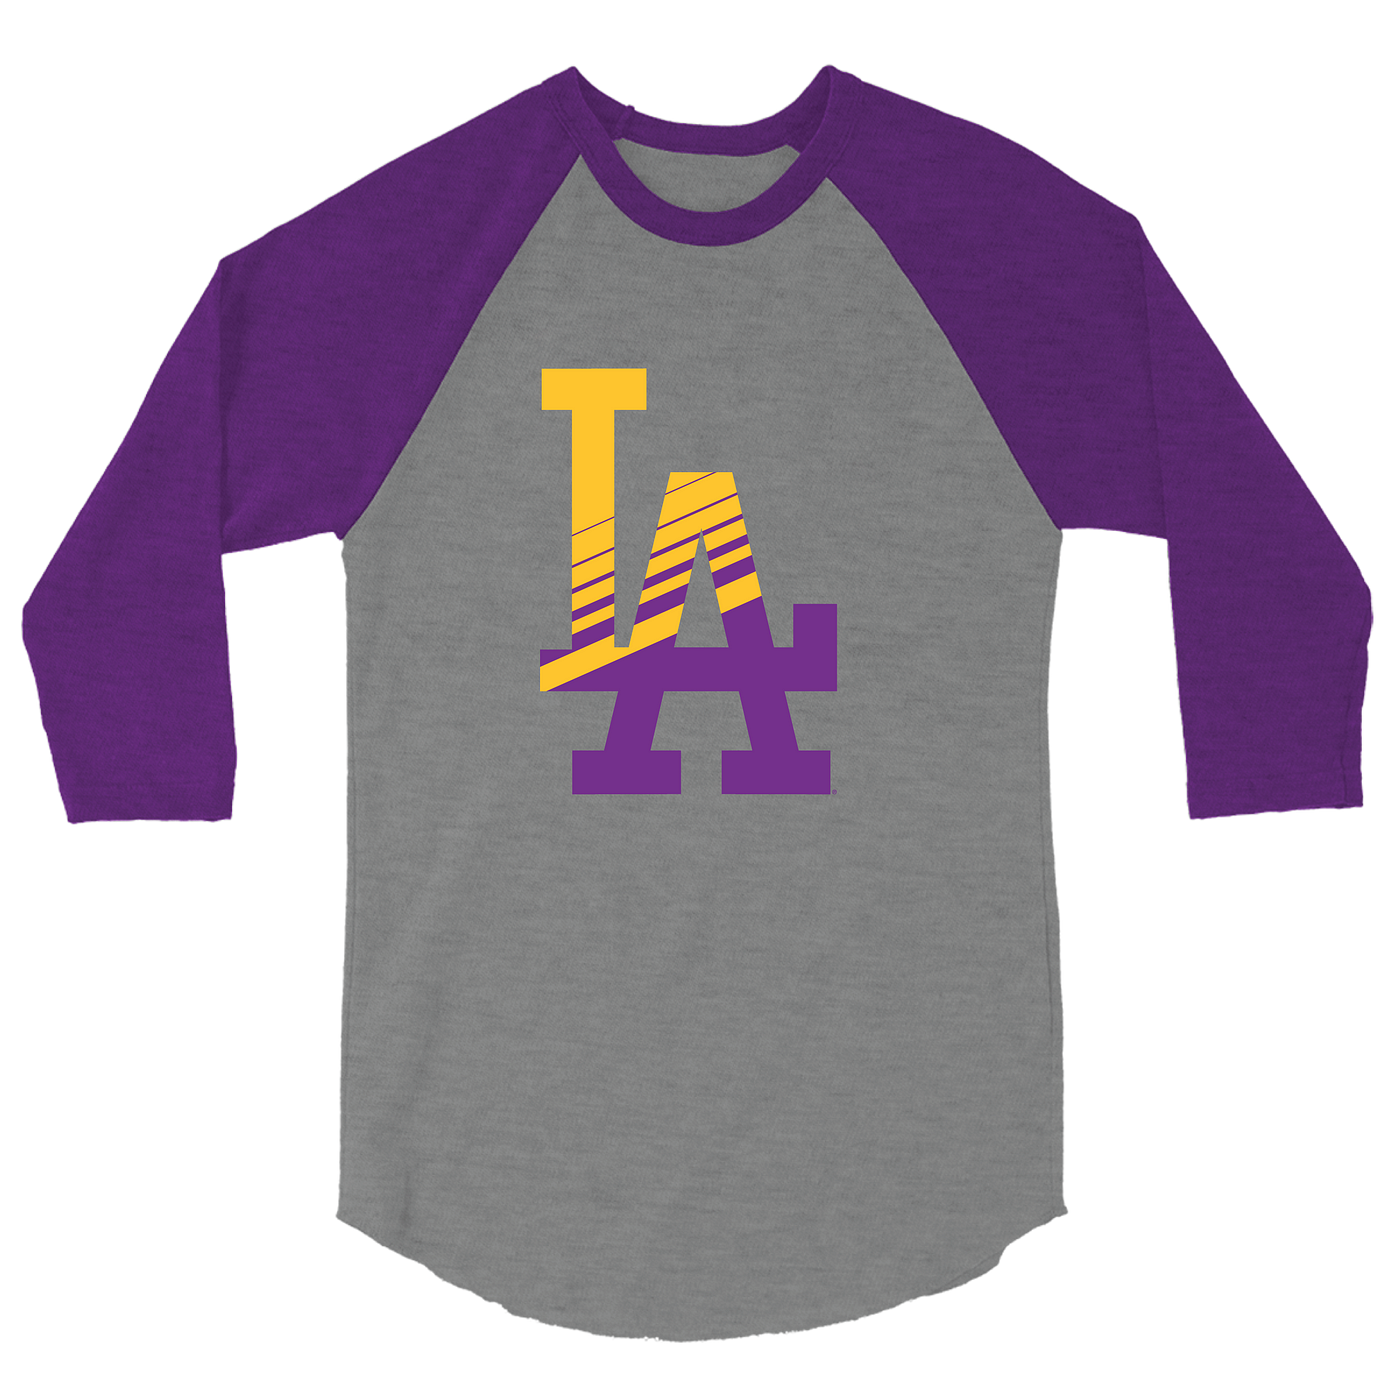 dodgers lakers night jersey 2021